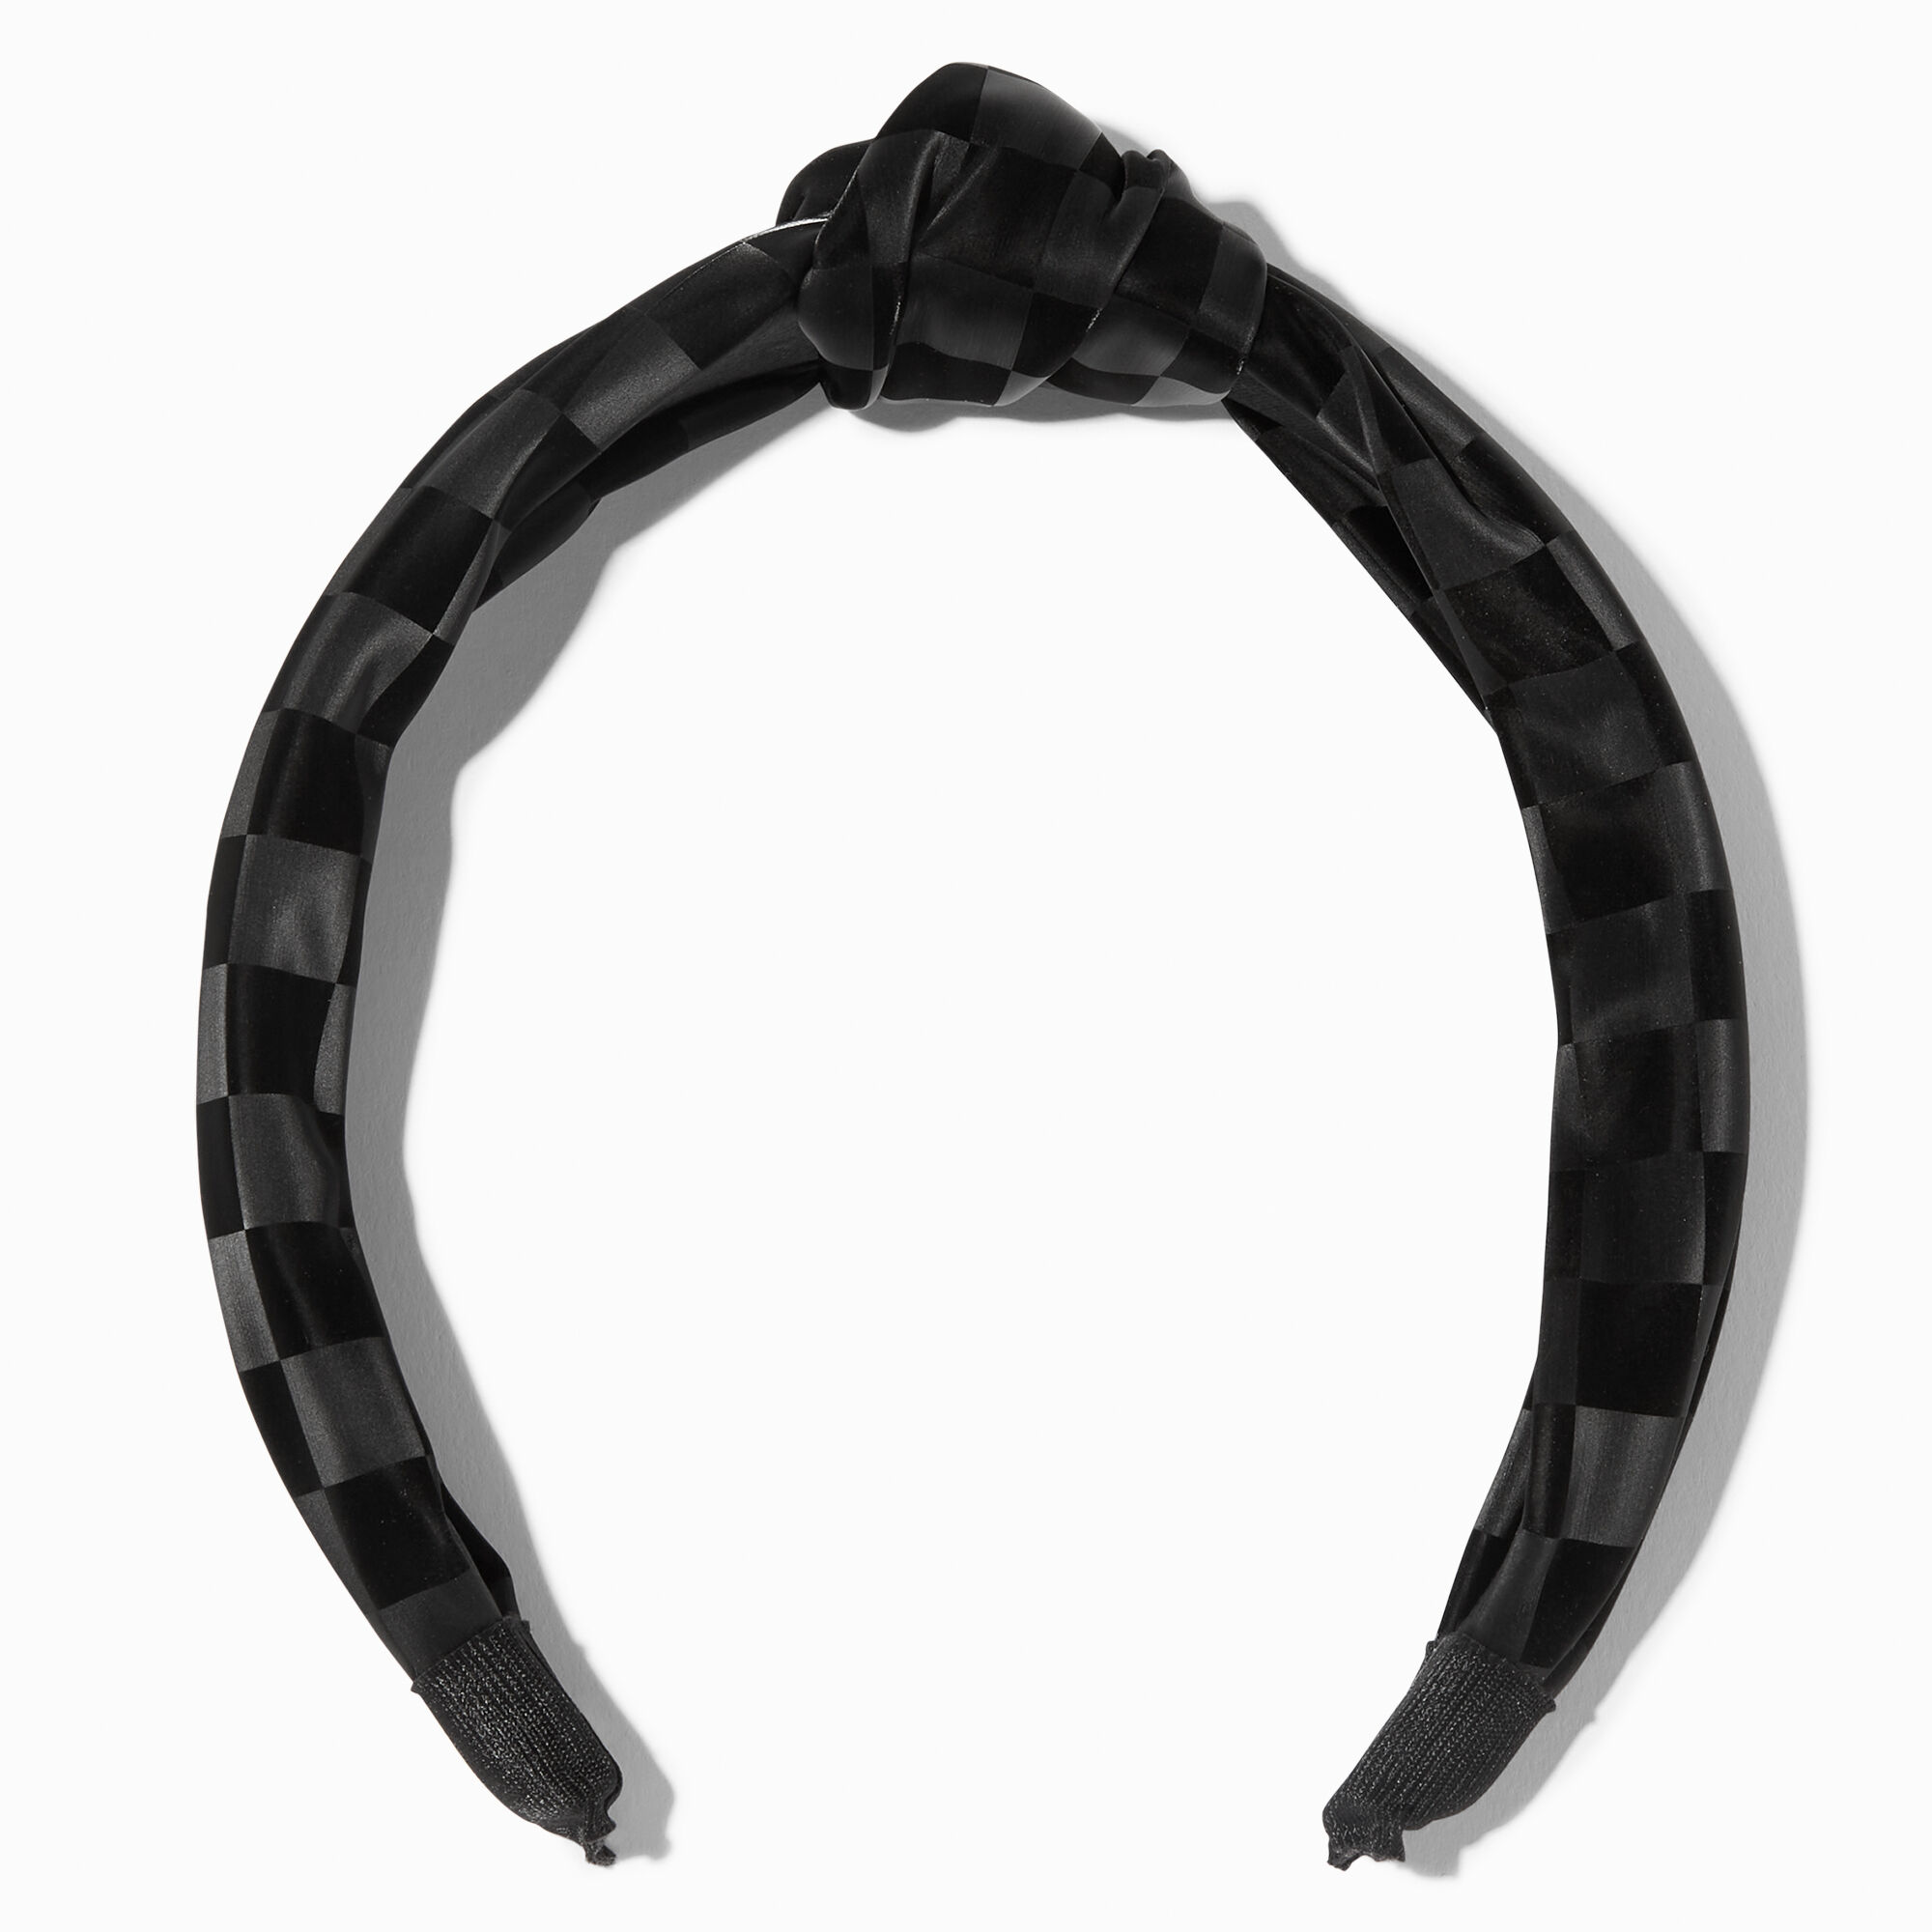 View Claires Check Knotted Headband Black information